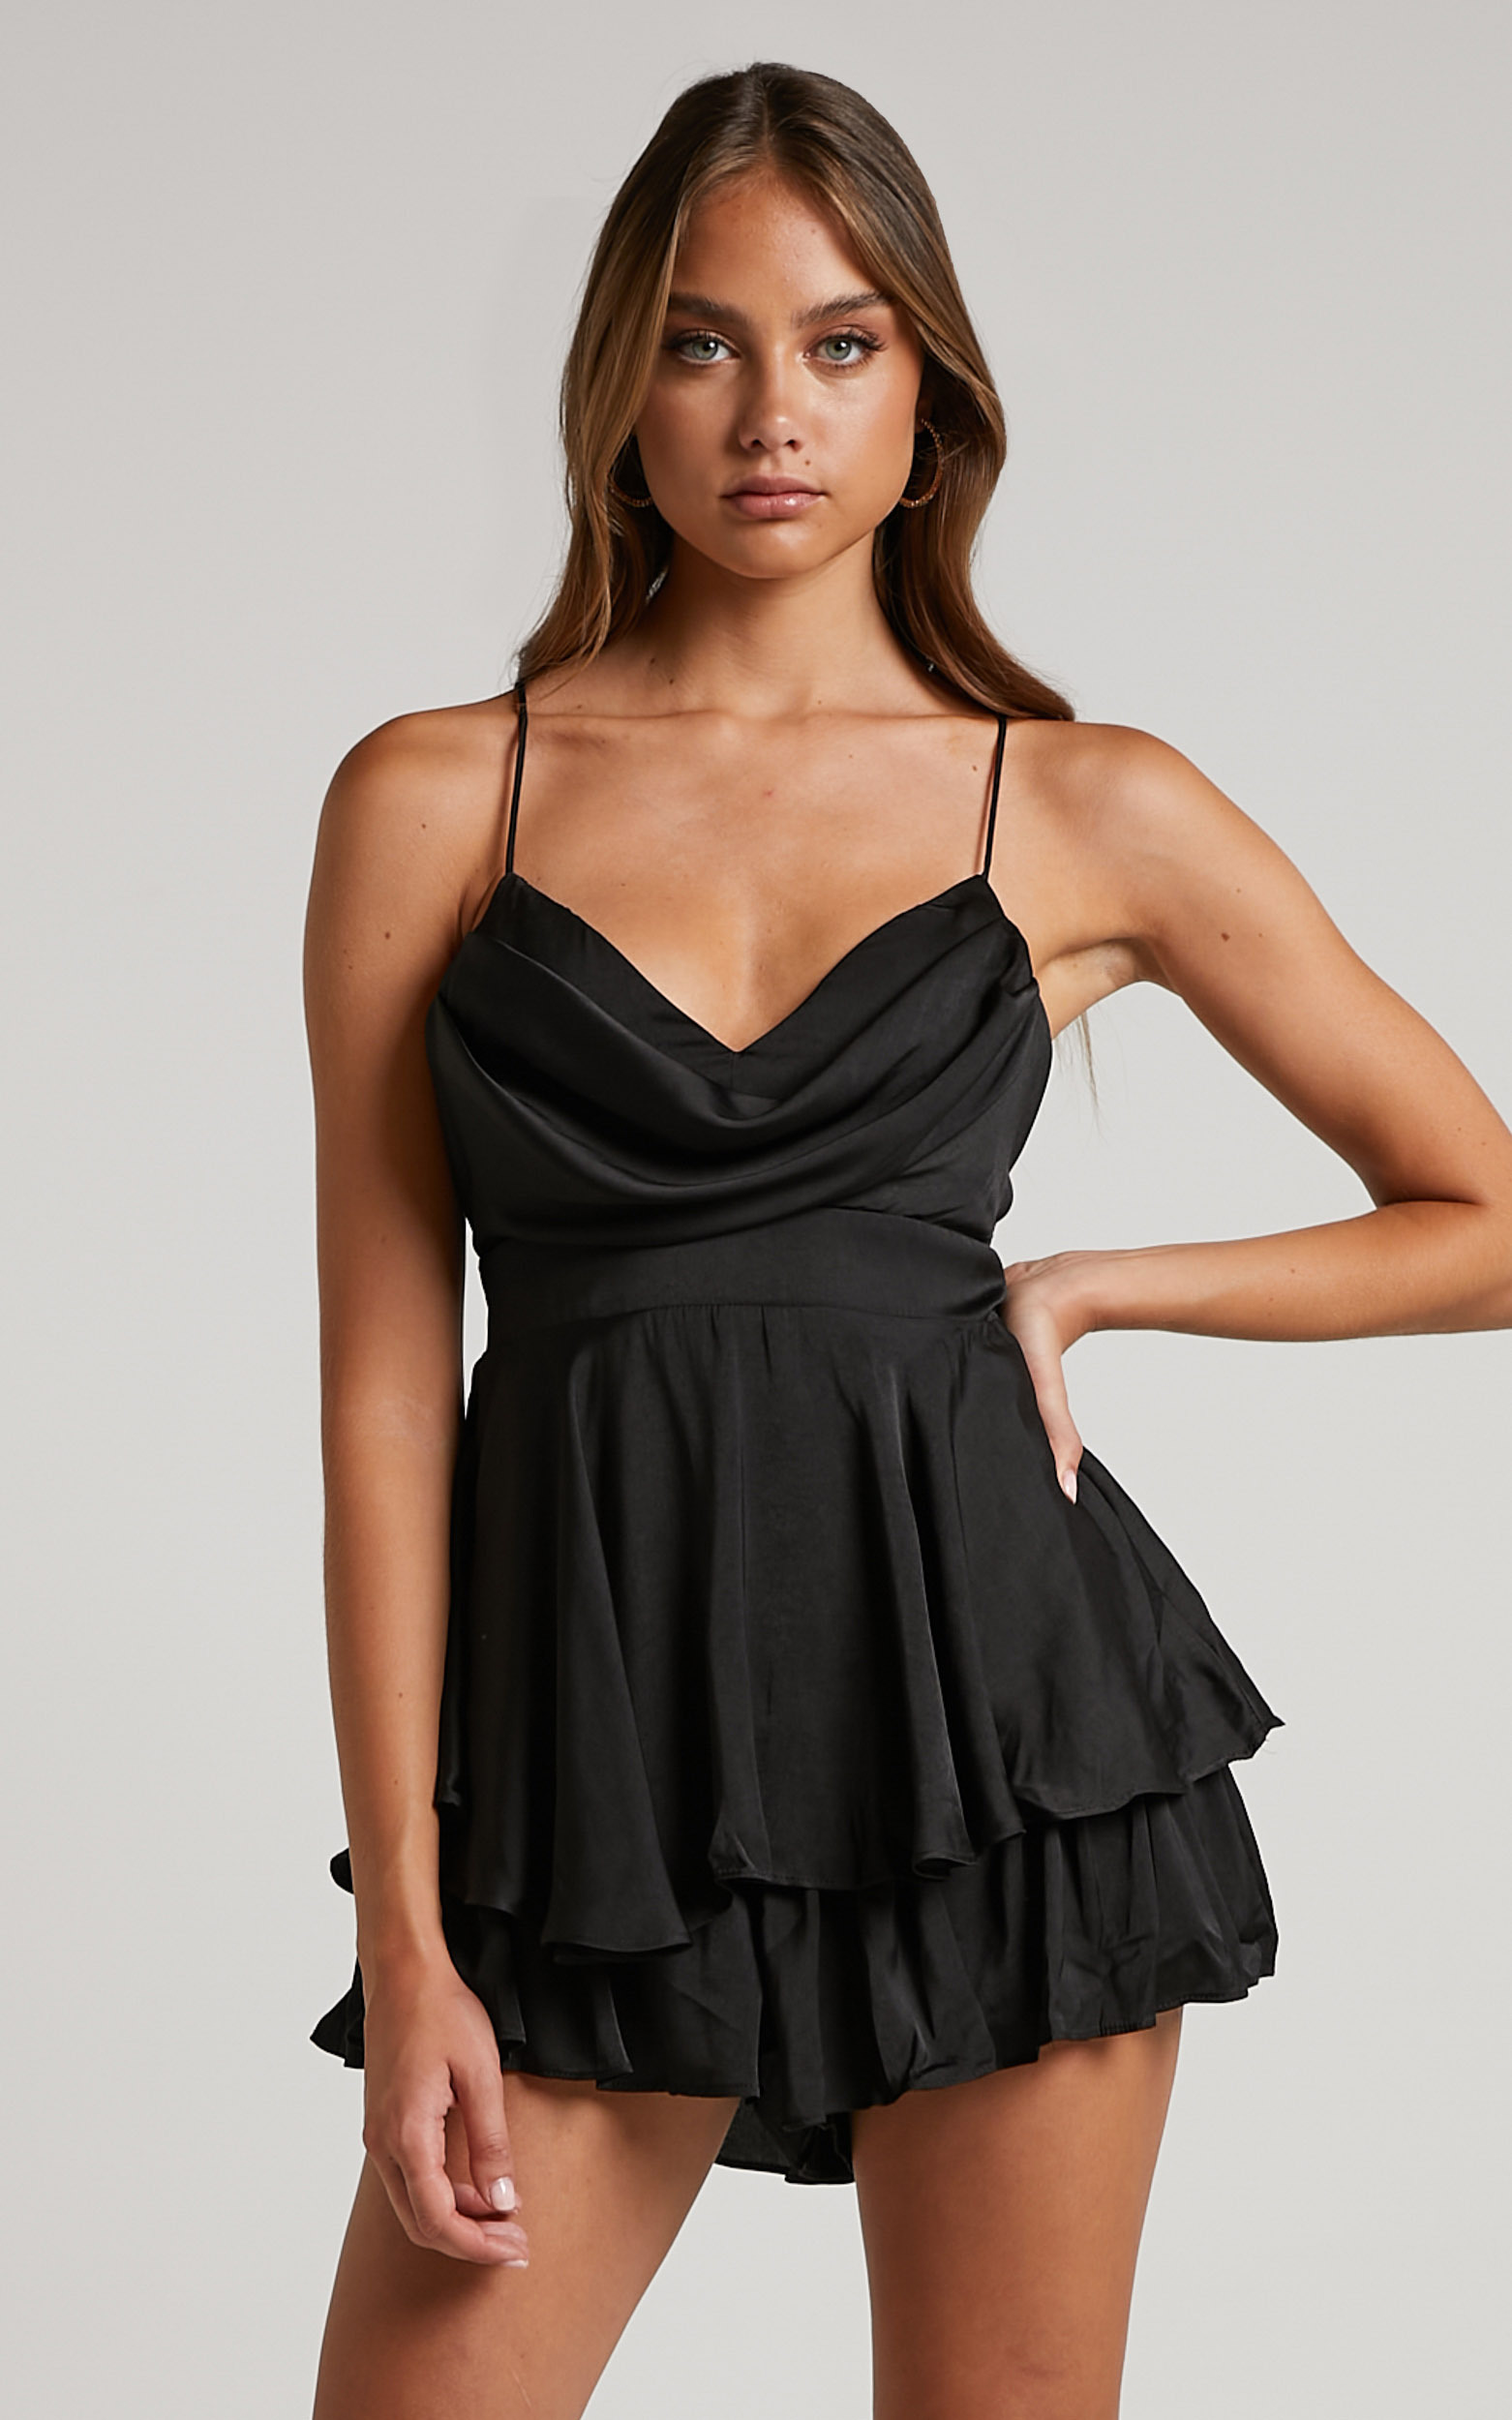 Delany Playsuit - Cowl Neck Layered Frill Playsuit in Black - 06, BLK1, hi-res image number null